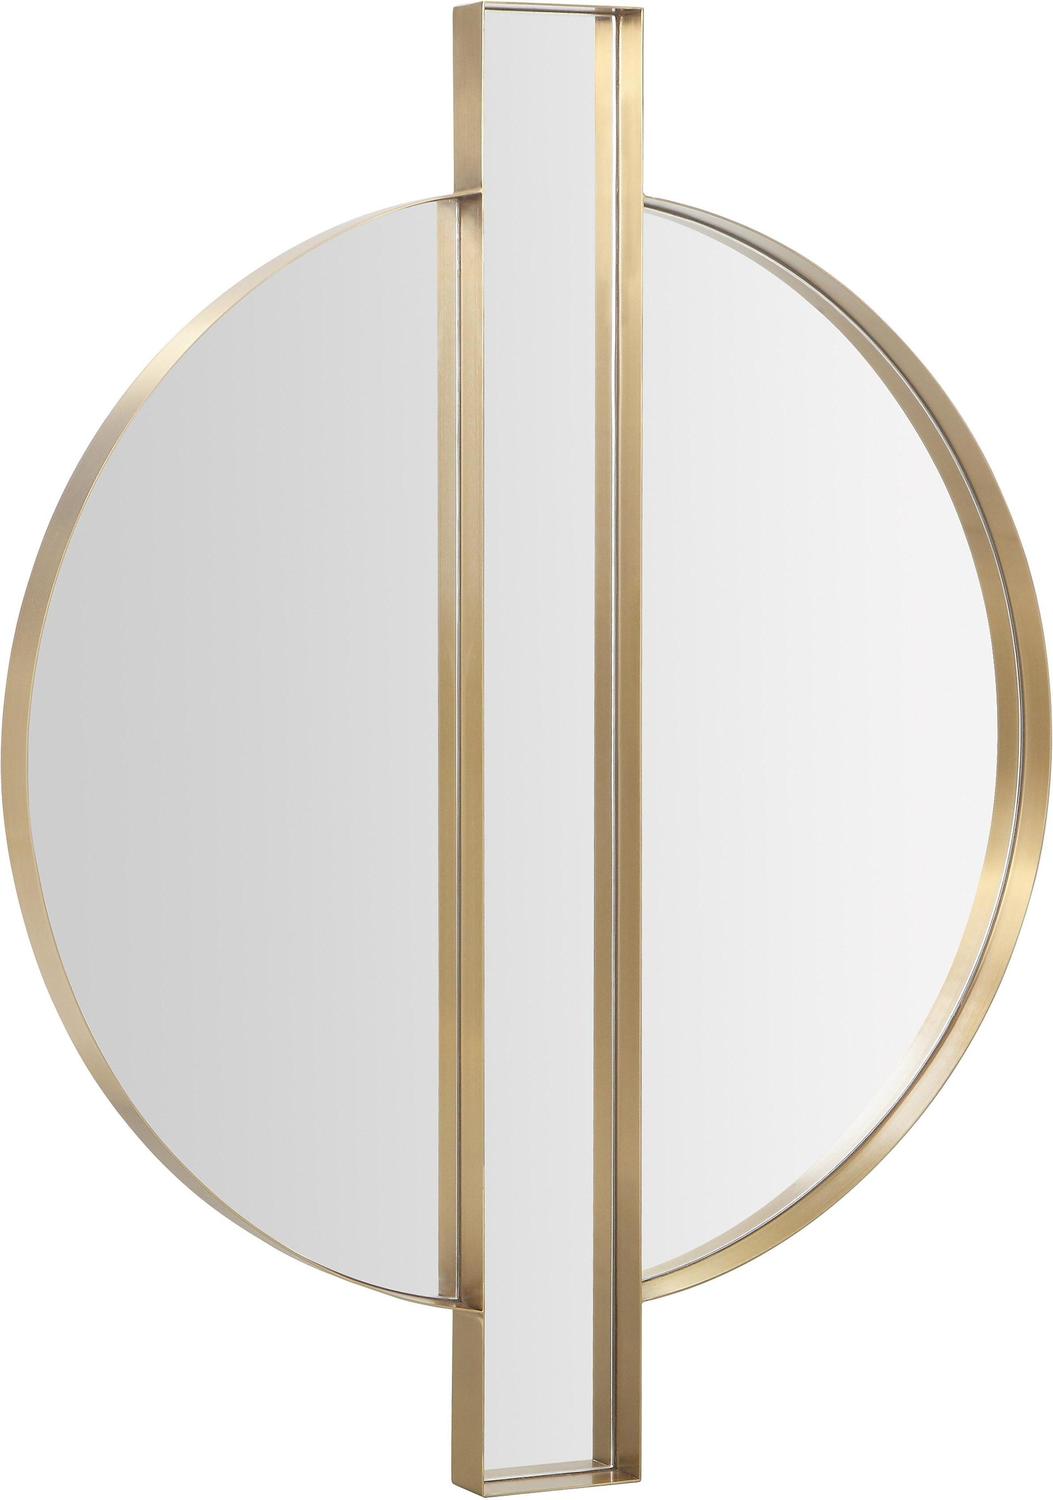 standing mirror in room Tov Furniture Mirrors Gold